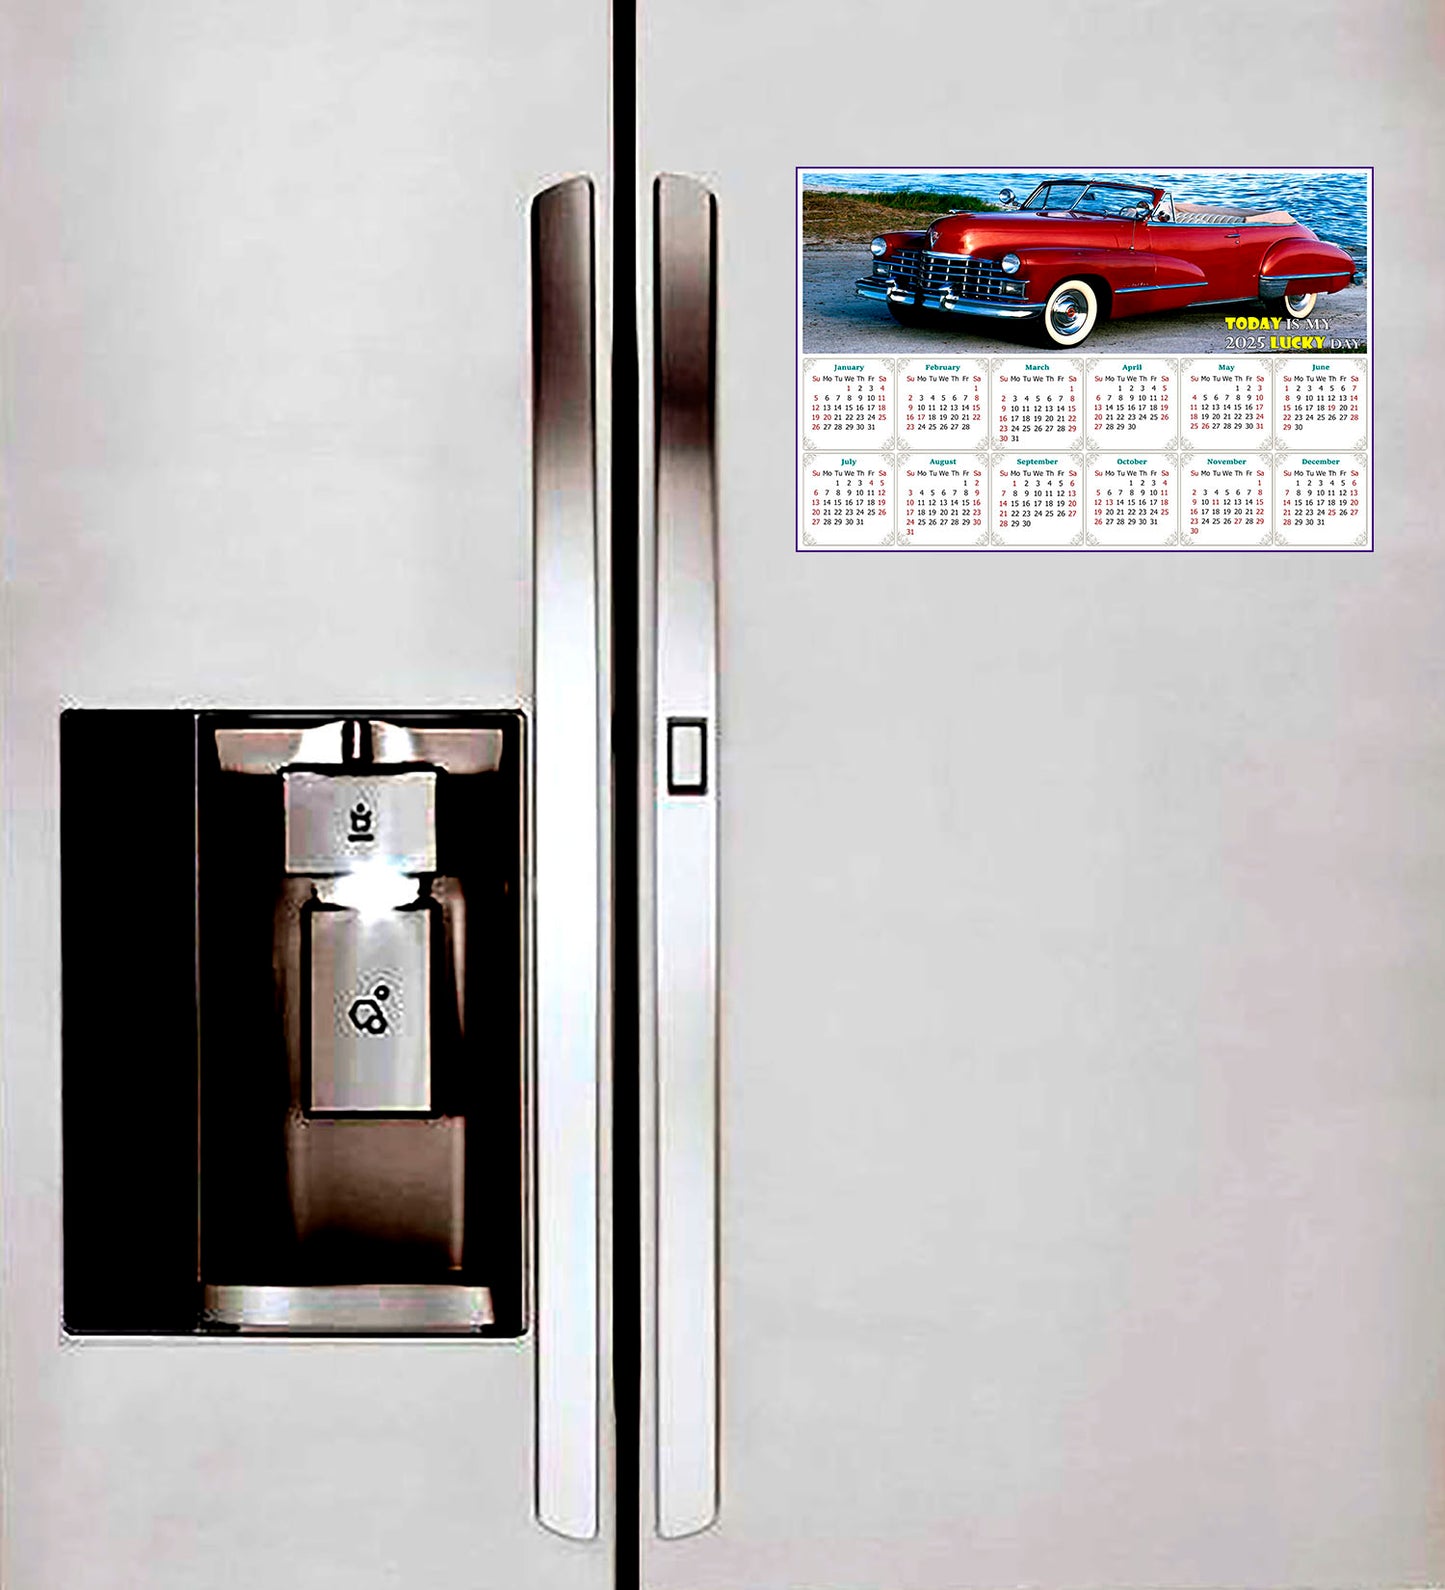 2025 Magnetic Calendar - Calendar Magnets - Today is my Lucky Day - Edition #44